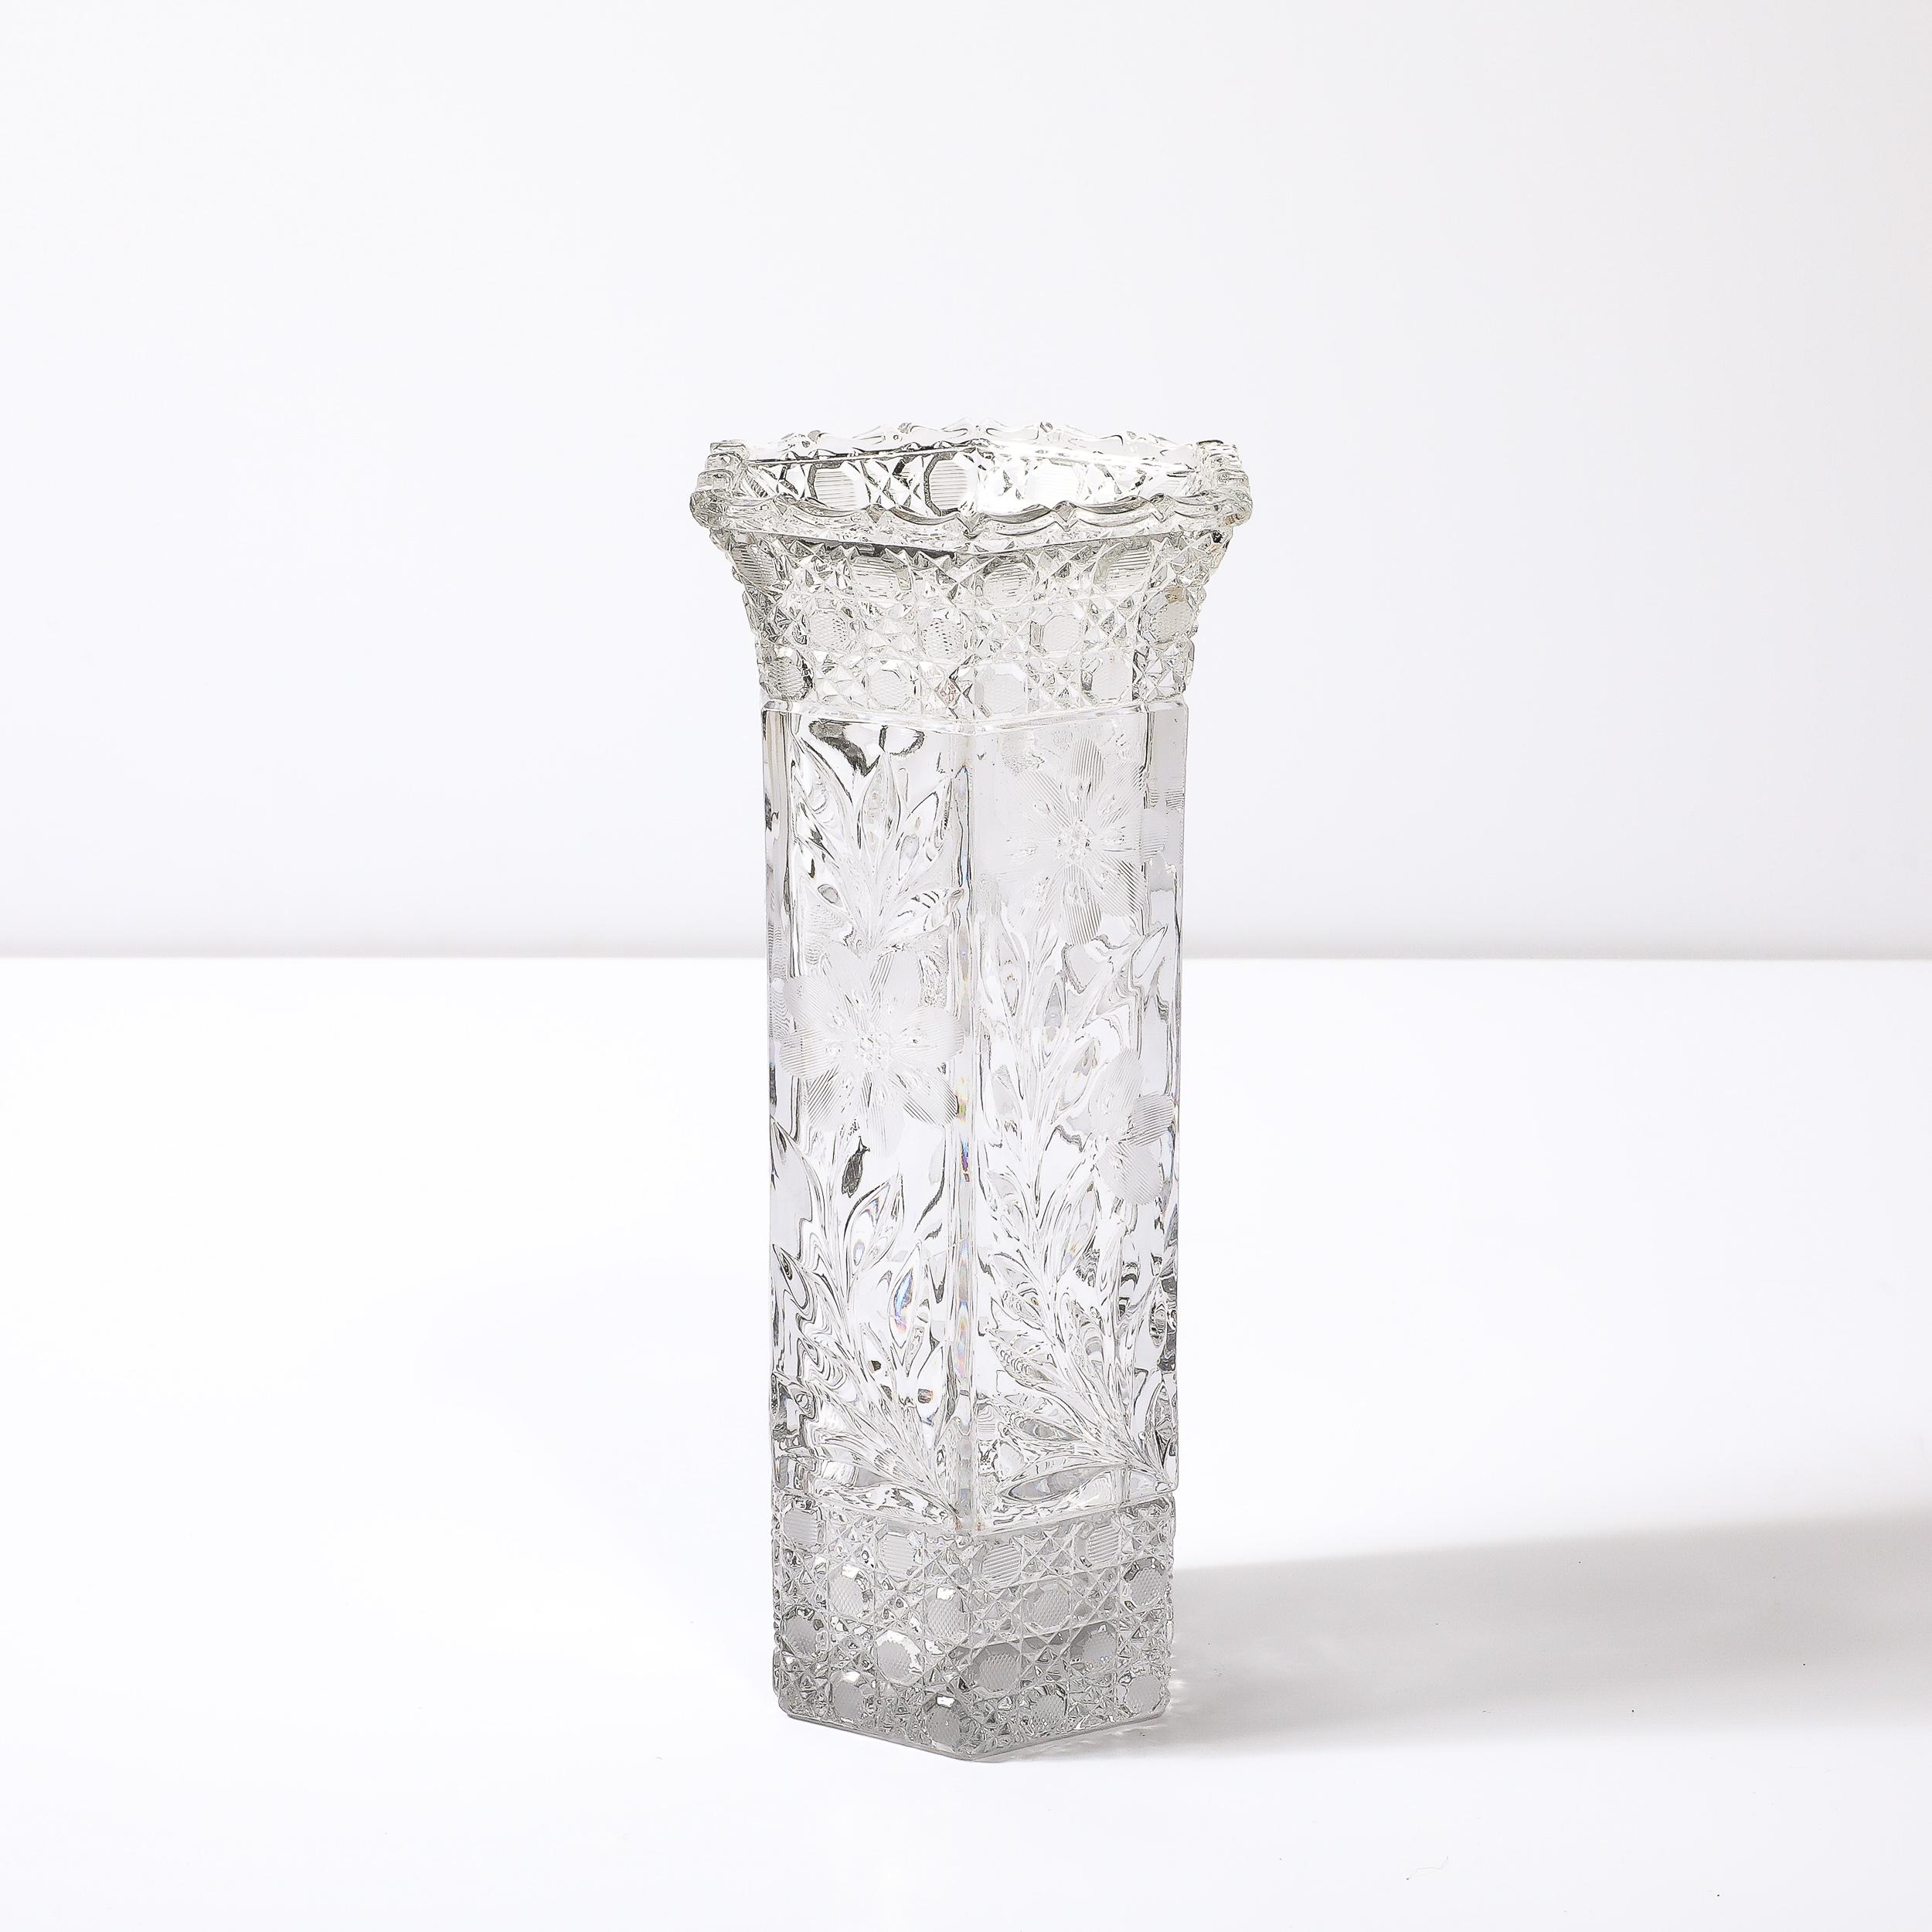 This sophisticated and beautifully fabricated Art Deco Harvard Pattern Octagonal Cut Crystal Vase W/ Floral and Geometric Detailing originates from the United States, Circa 1925. Features a wonderful transparent cut crystal rendered in the Harvard